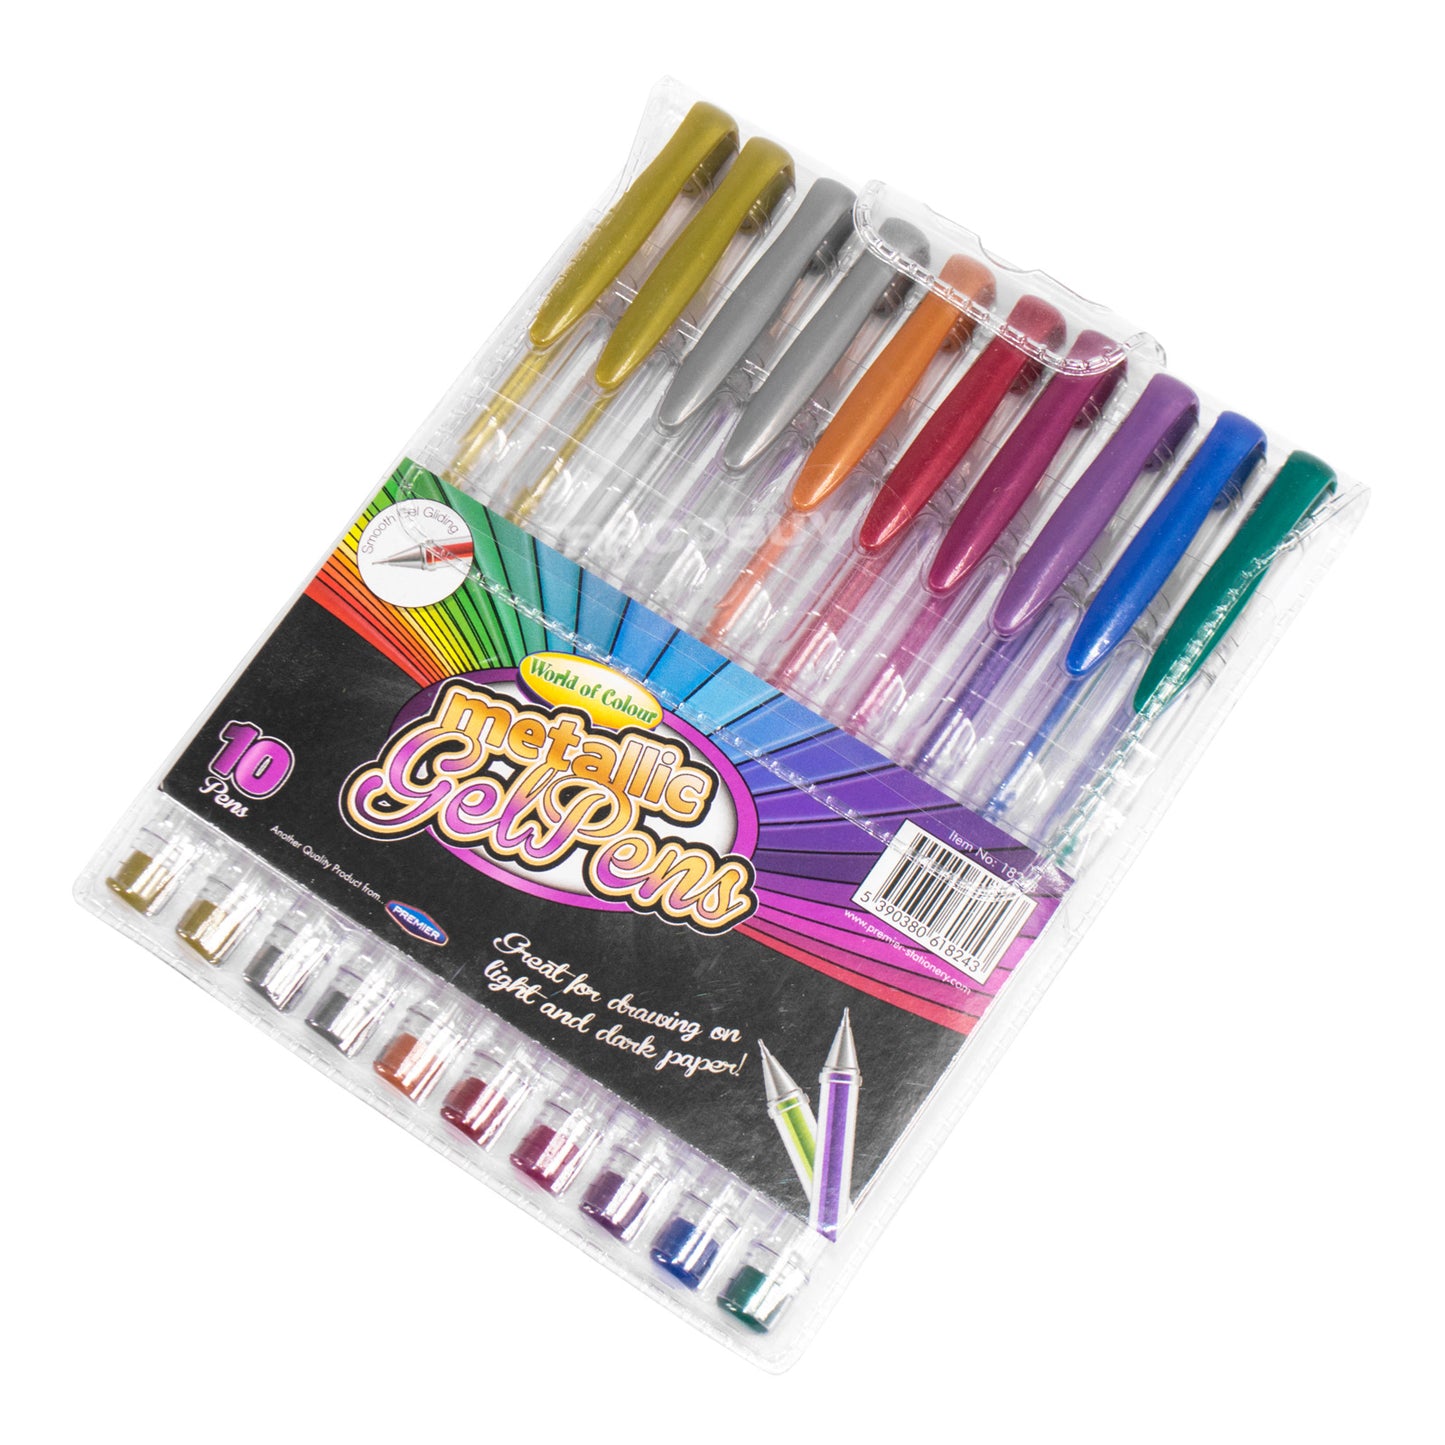 Pack of 10 Metallic Gel Writing Pens with Assorted Colours